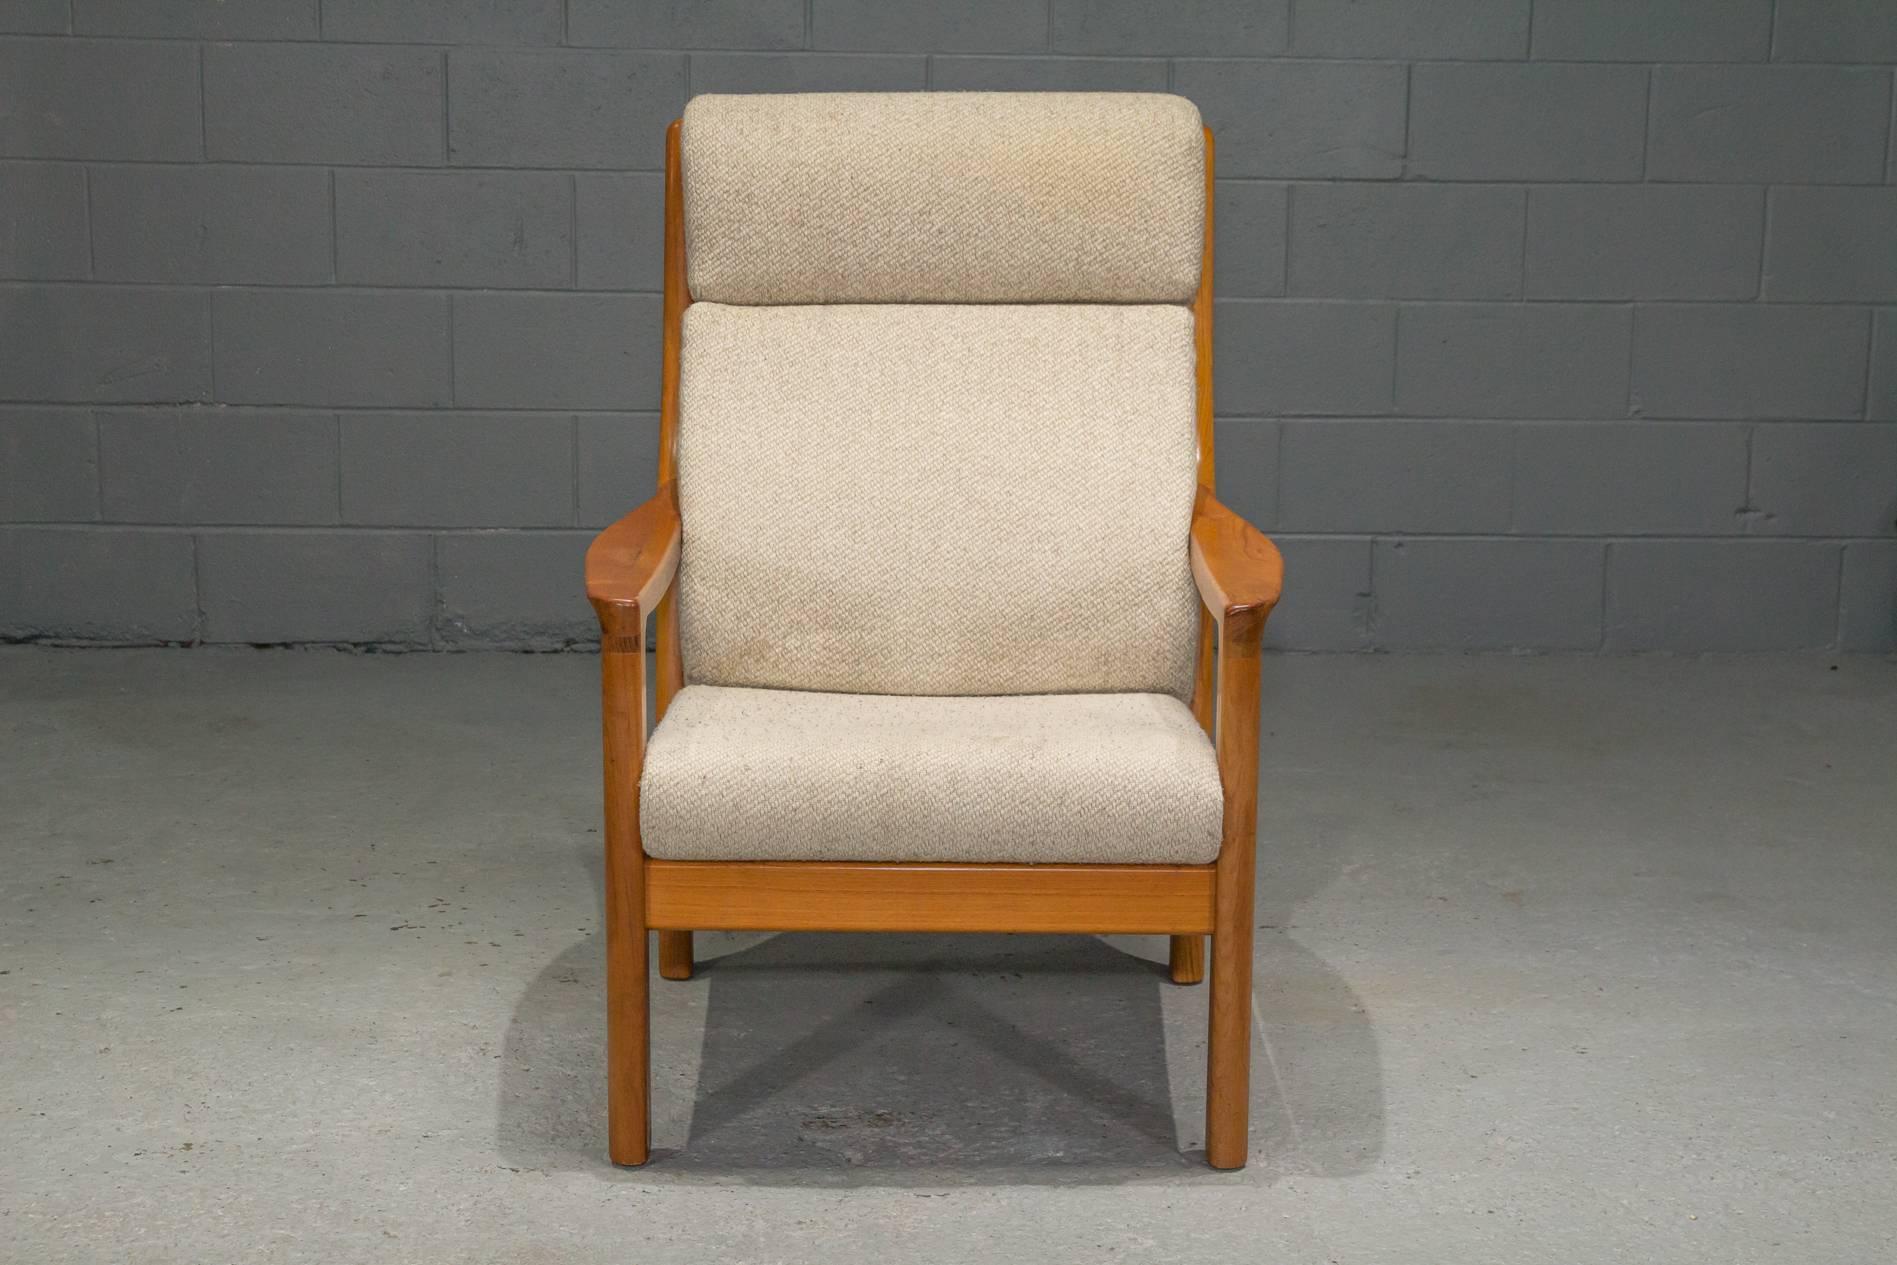 Teak high back armchair by Johannes Andersen for CFC Silkeborg. Extremely sturdy, comfortable and supportive.